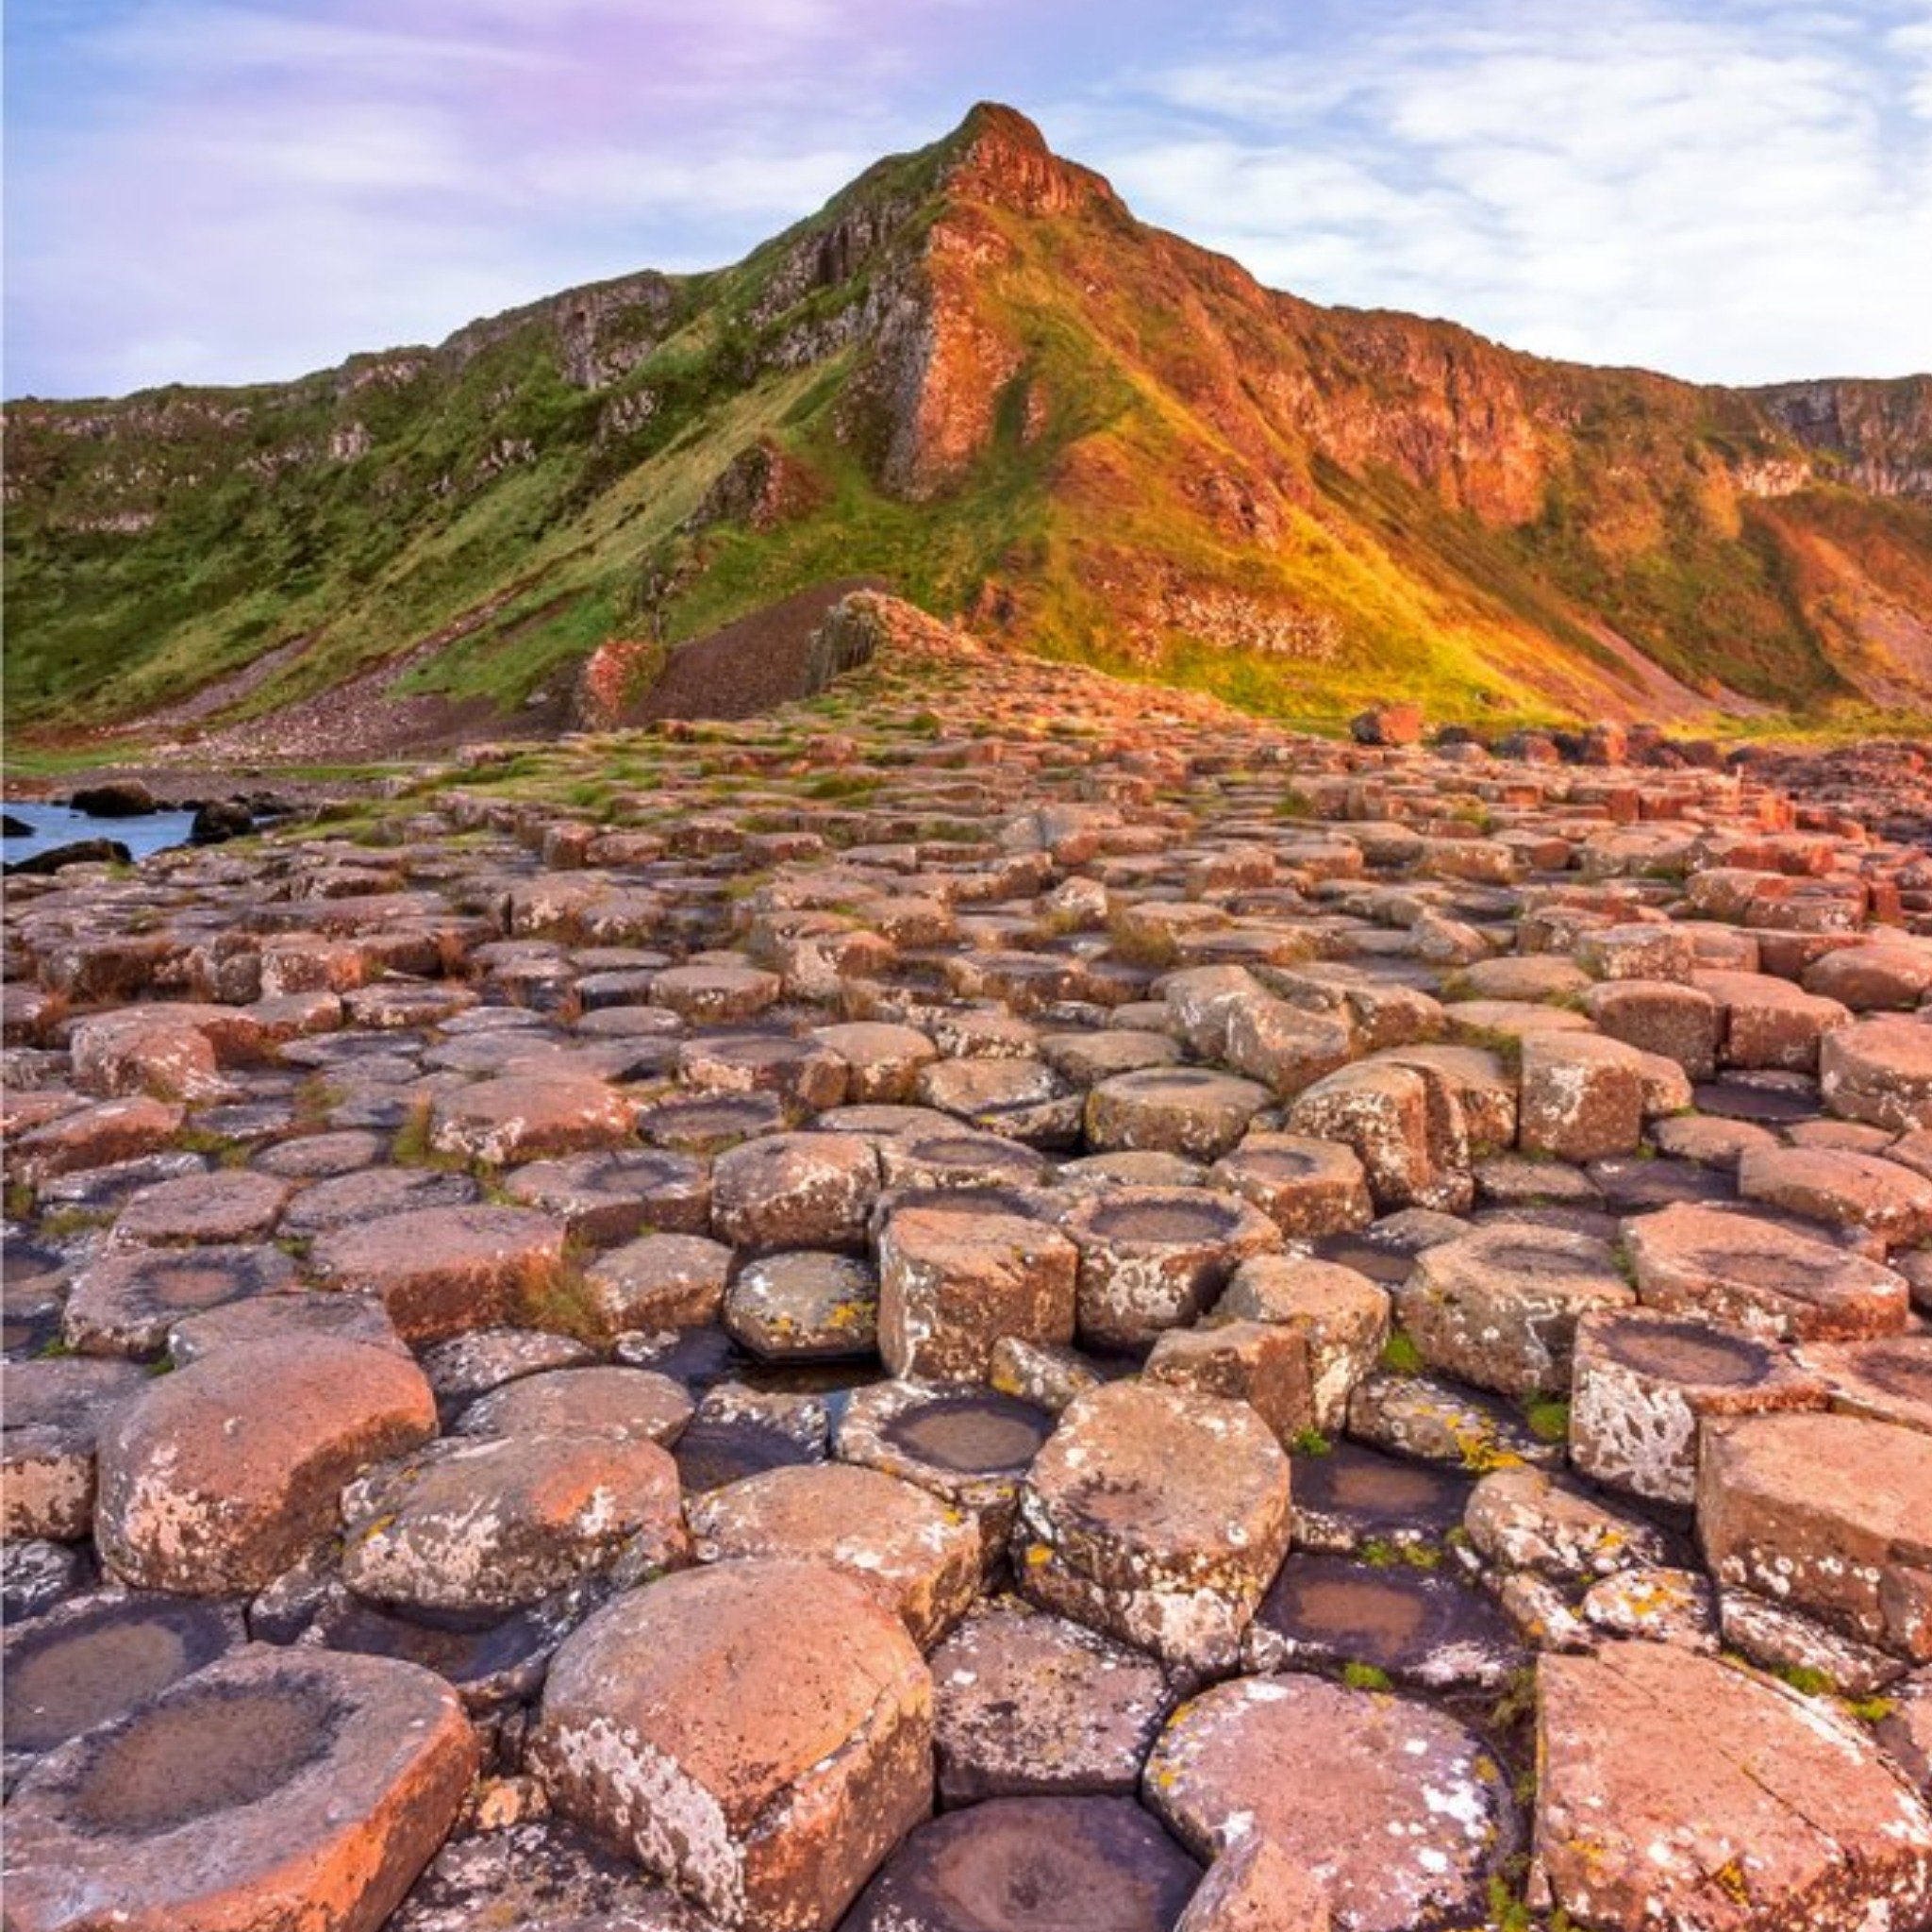 Moonpig Photographic Image Of The Giant's Causeway, Bushmills Card, Square